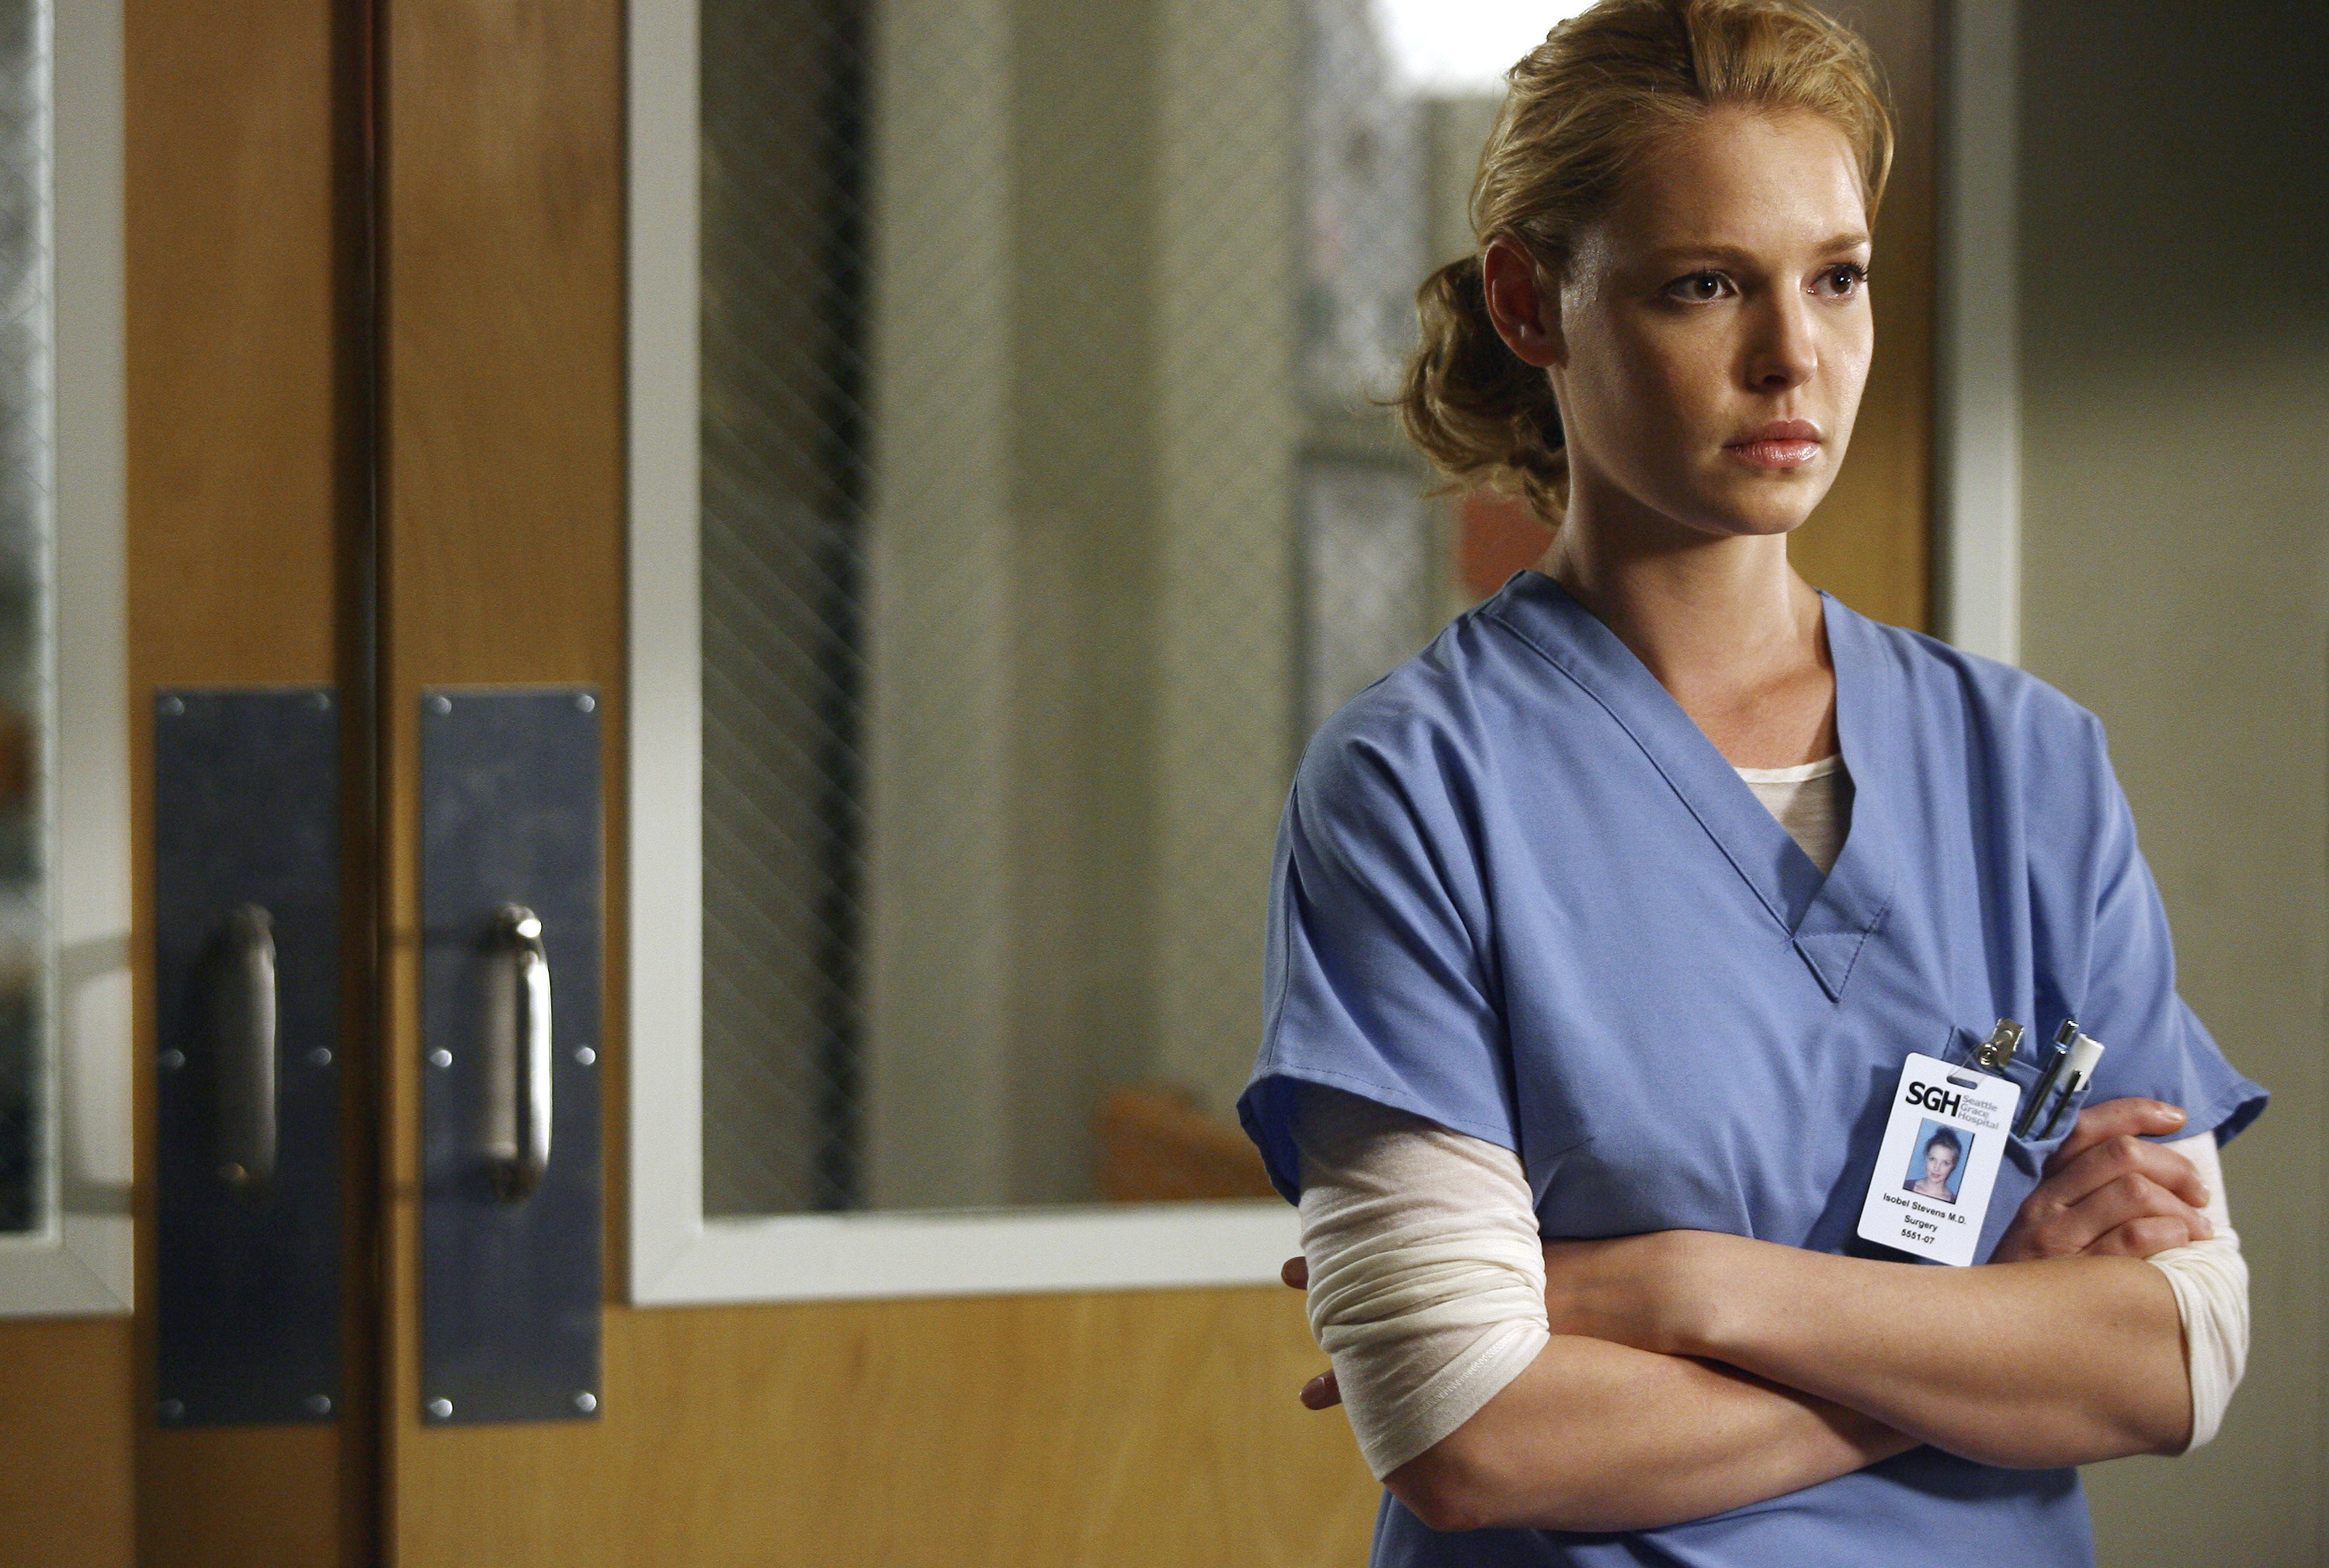 Izzie in her scrubs stands with her arms folded